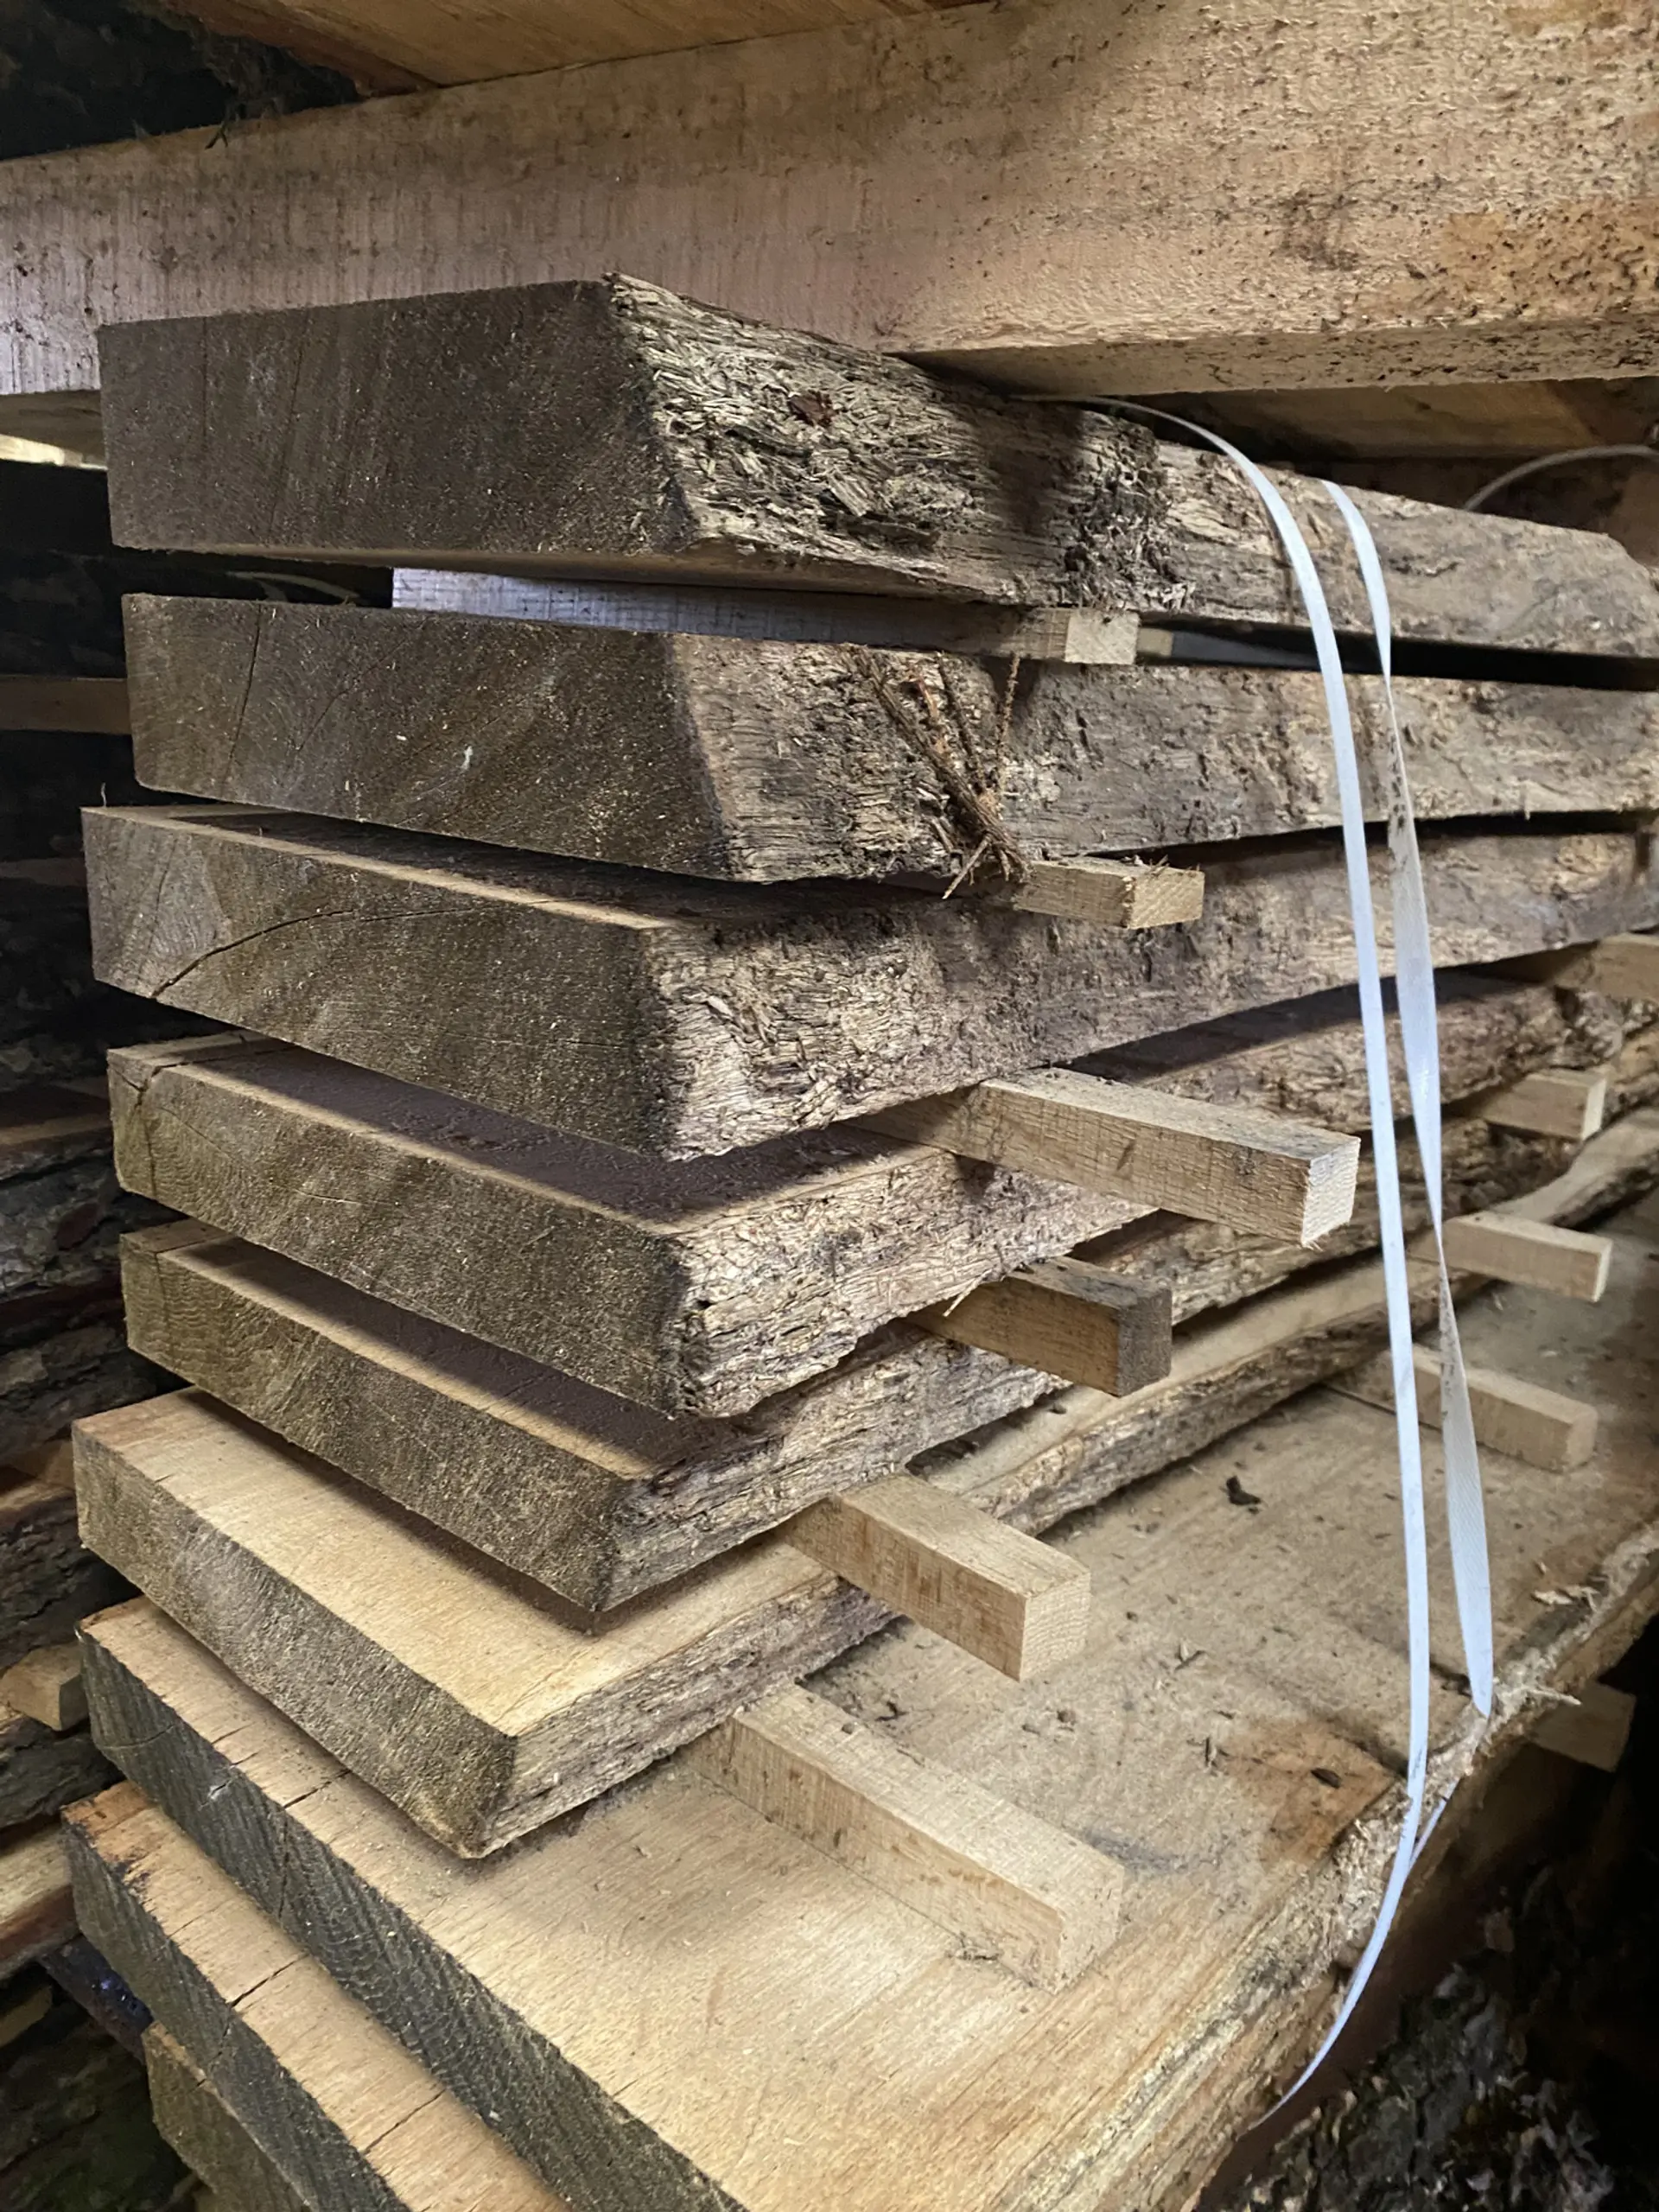 Stacks of unfinished looking wood planks, held apart from each other, with short chunks of a different wood